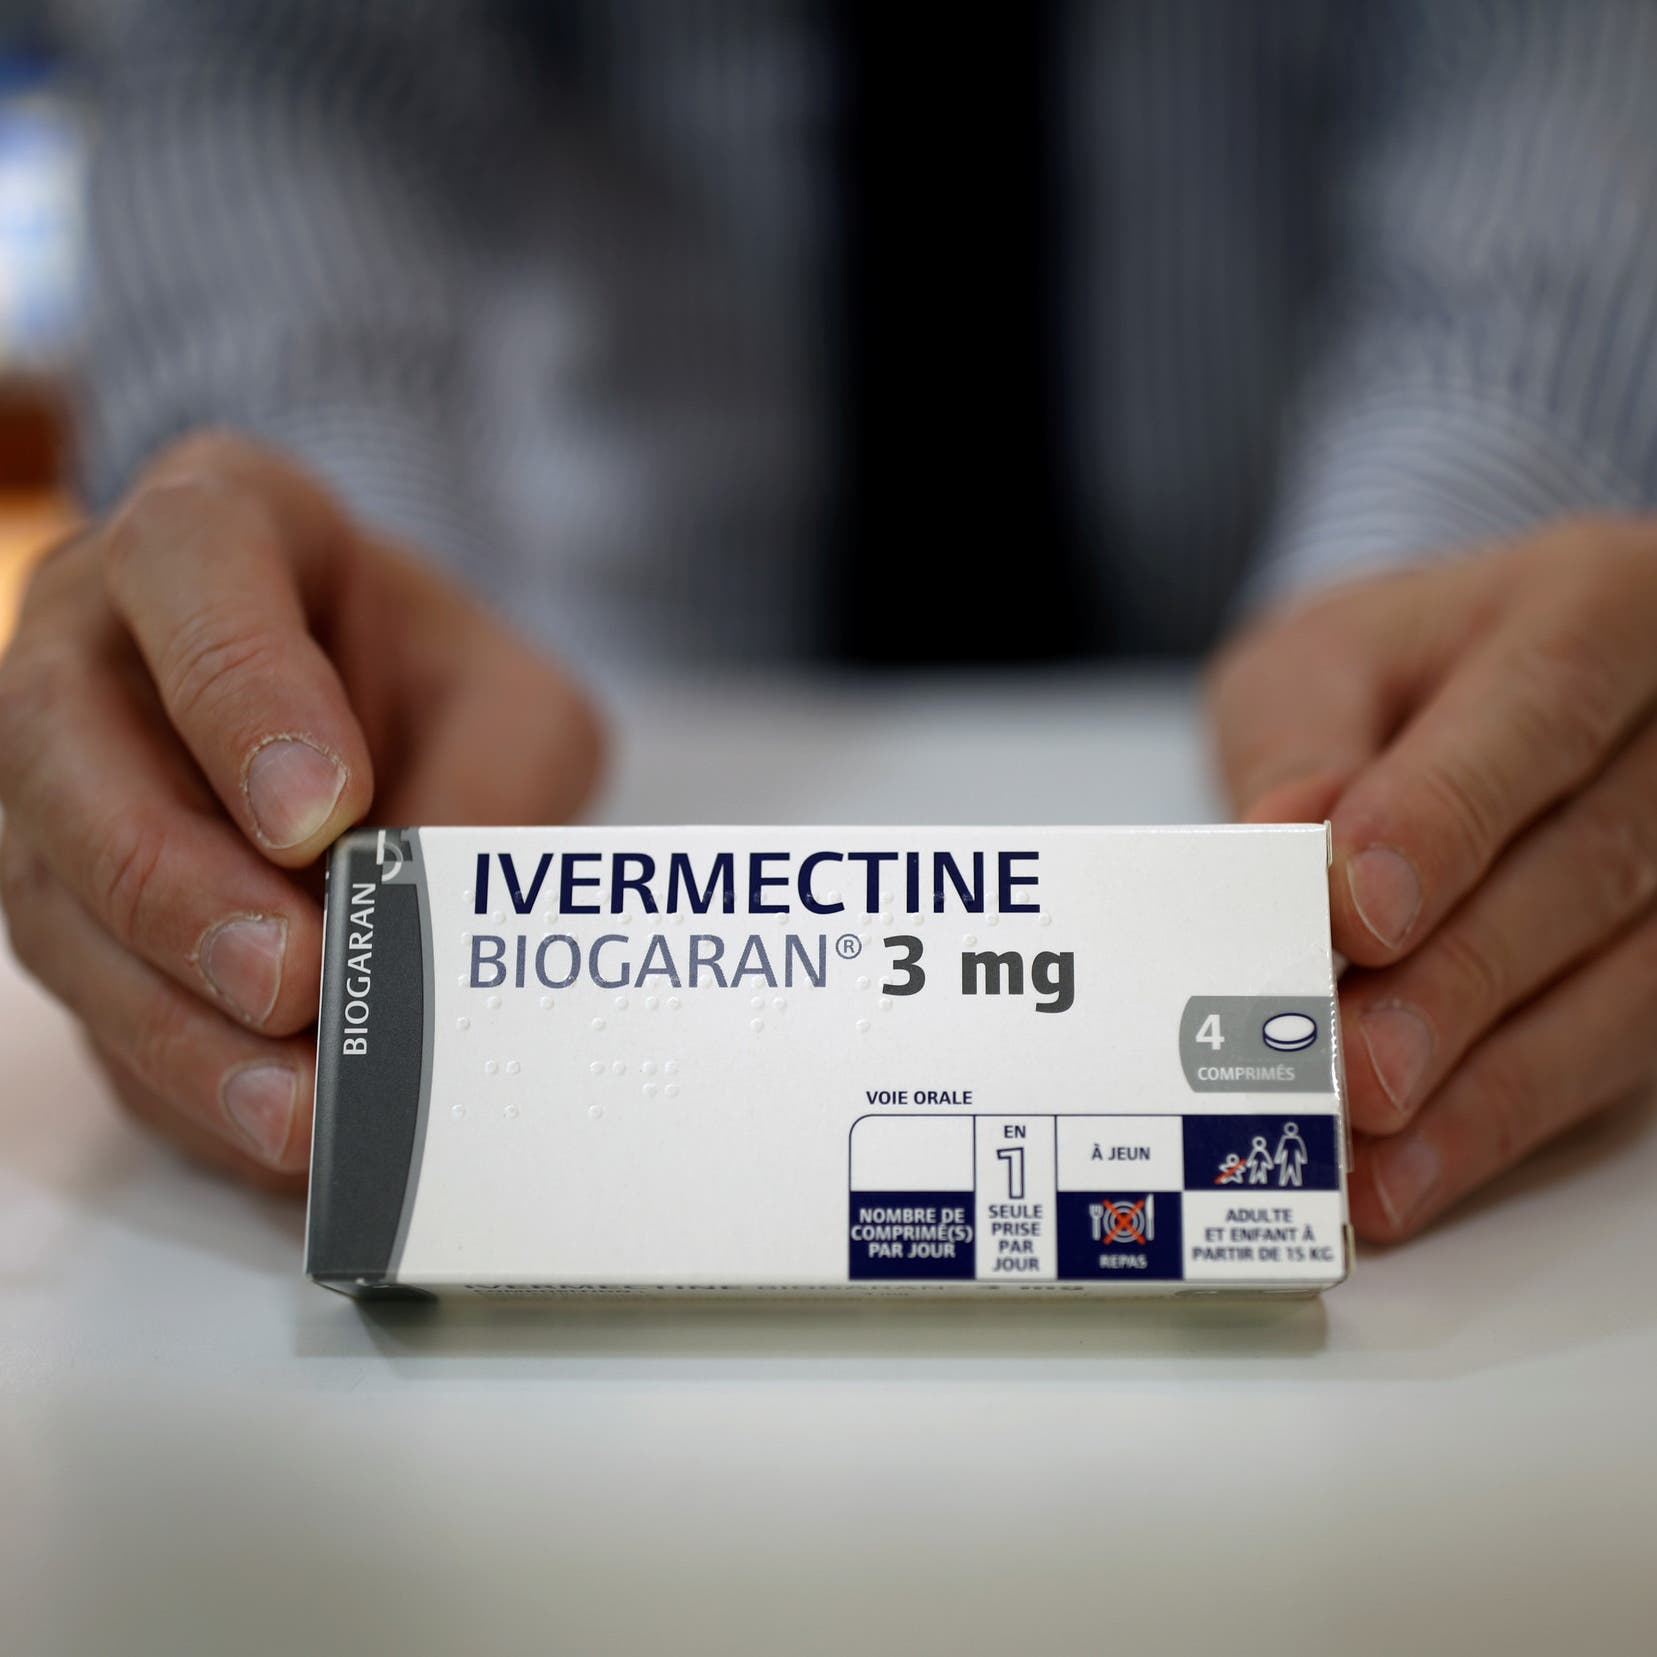 Scientists say ivermectin overhyped after surge in use of animal drug to fight COVID 